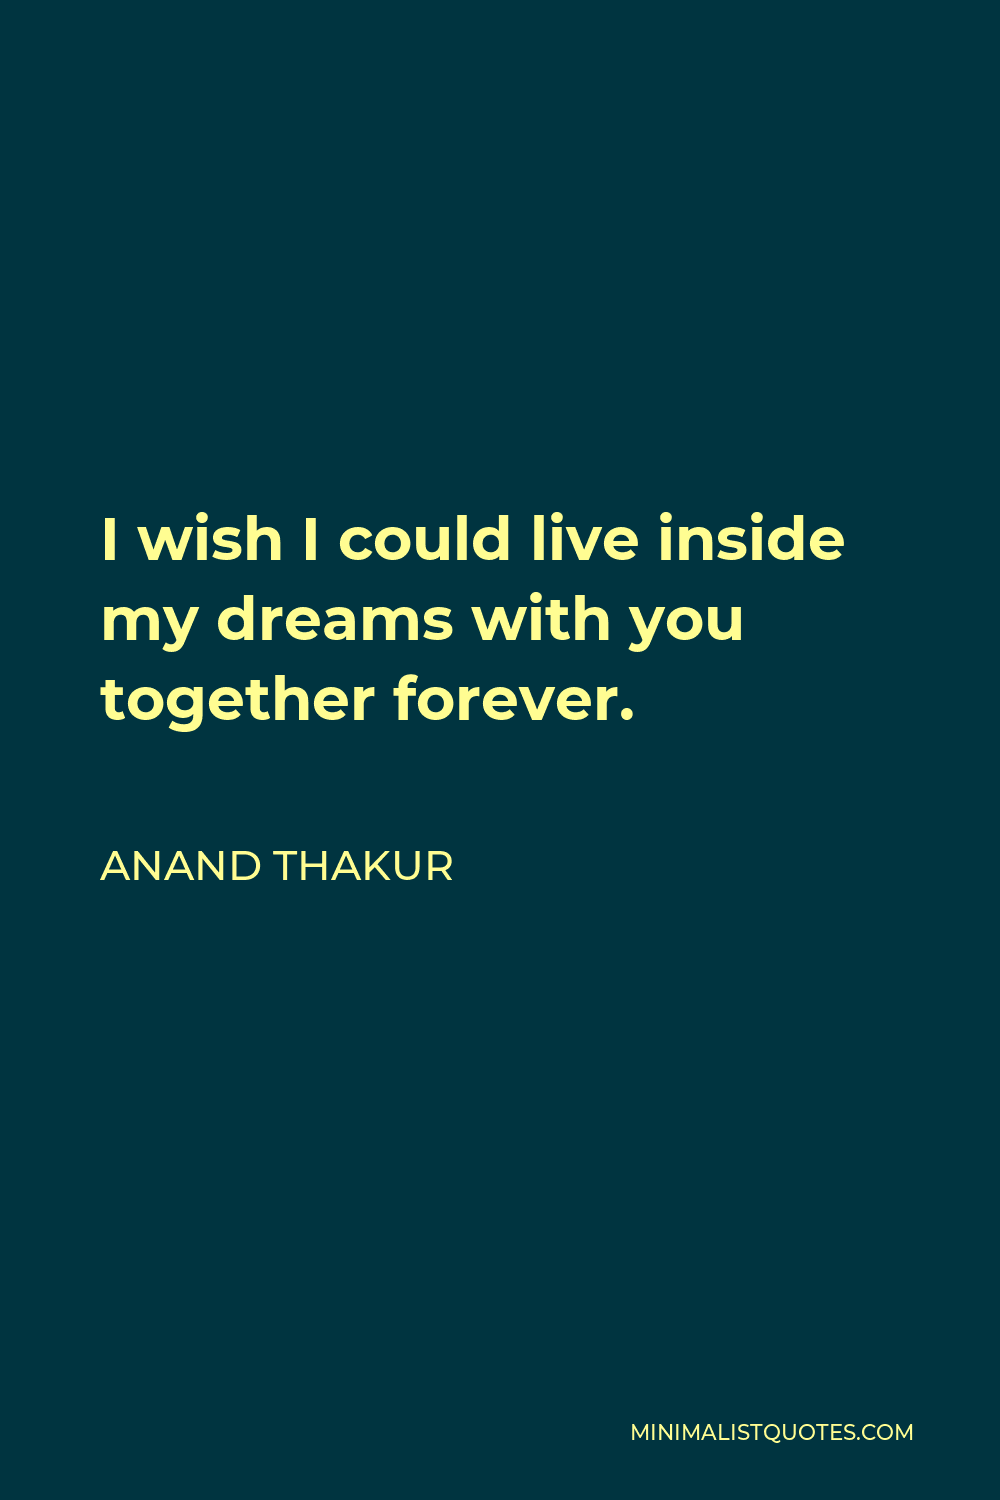 Anand Thakur Quote - I wish I could live inside my dreams with you together forever.